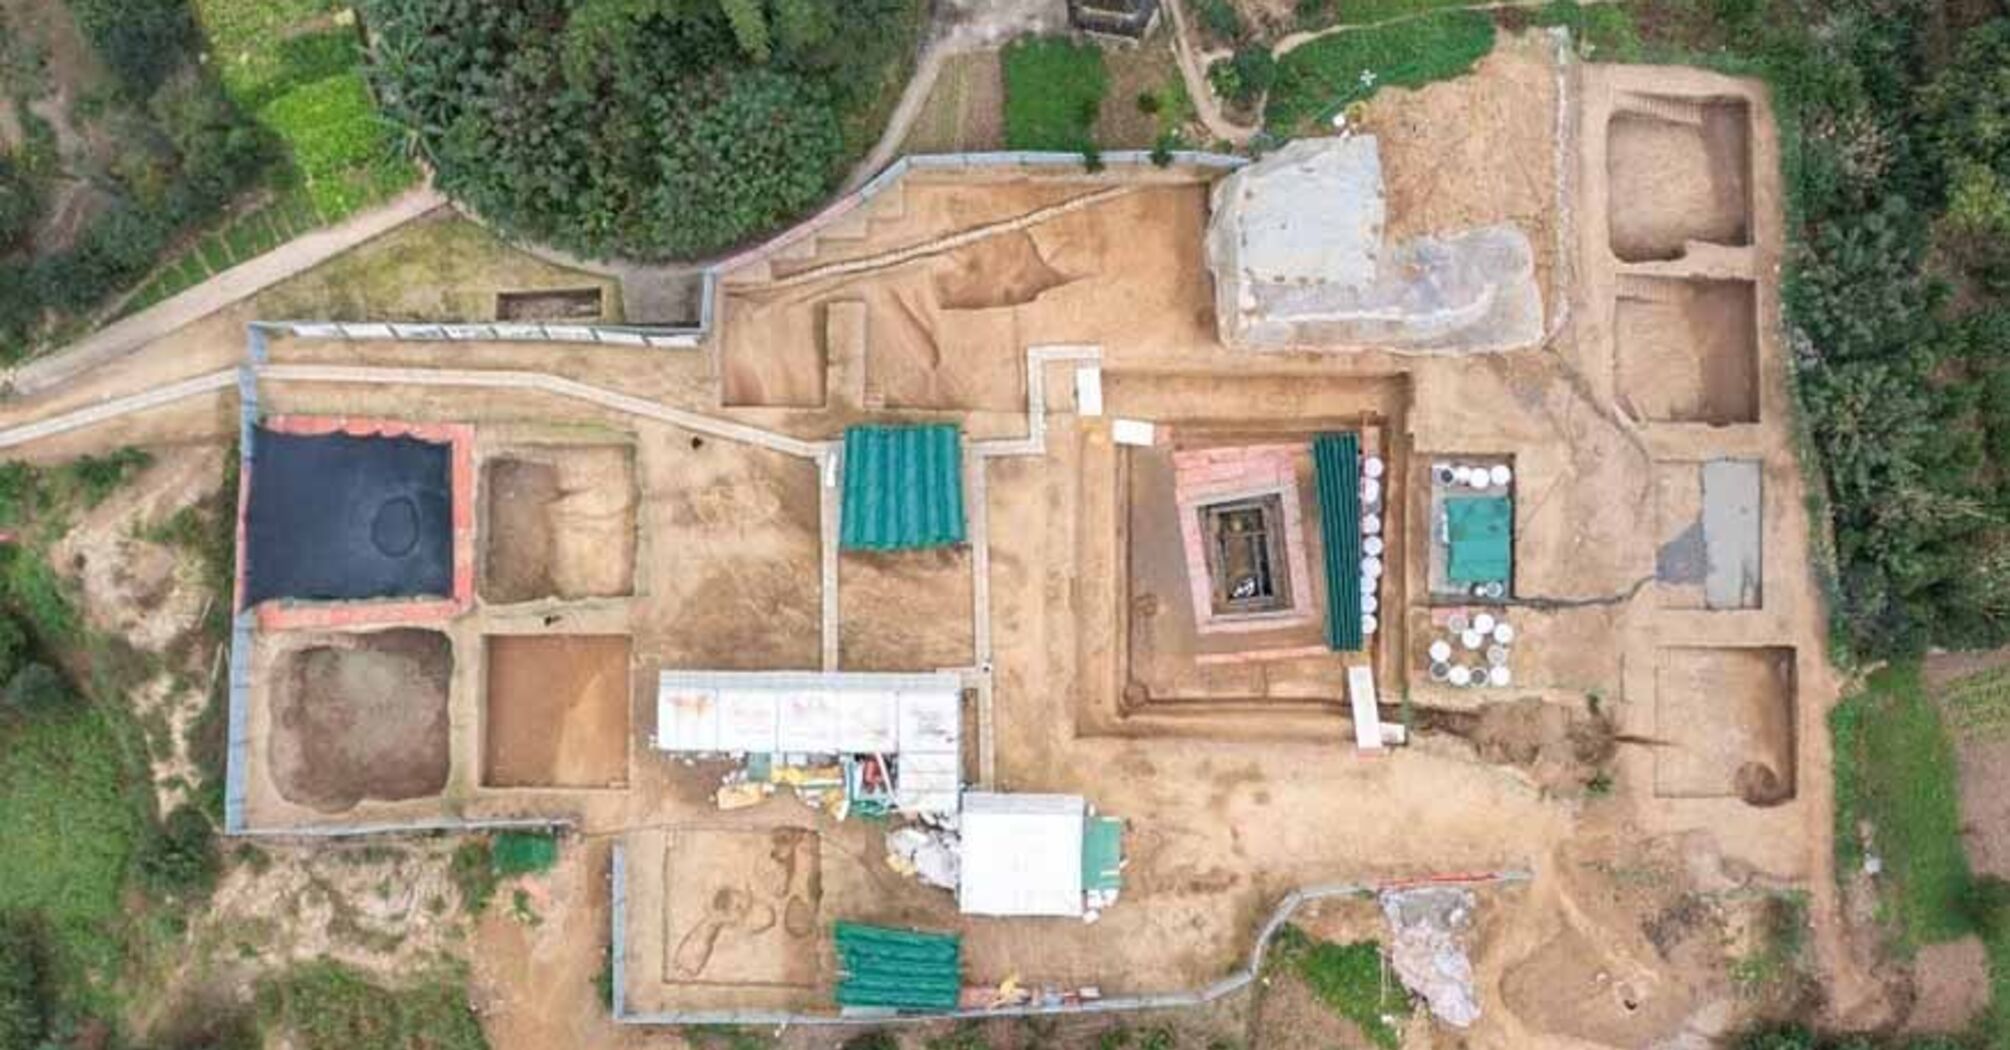 A 2200-year-old tomb filled with ancient artifacts found in China (photos and video)